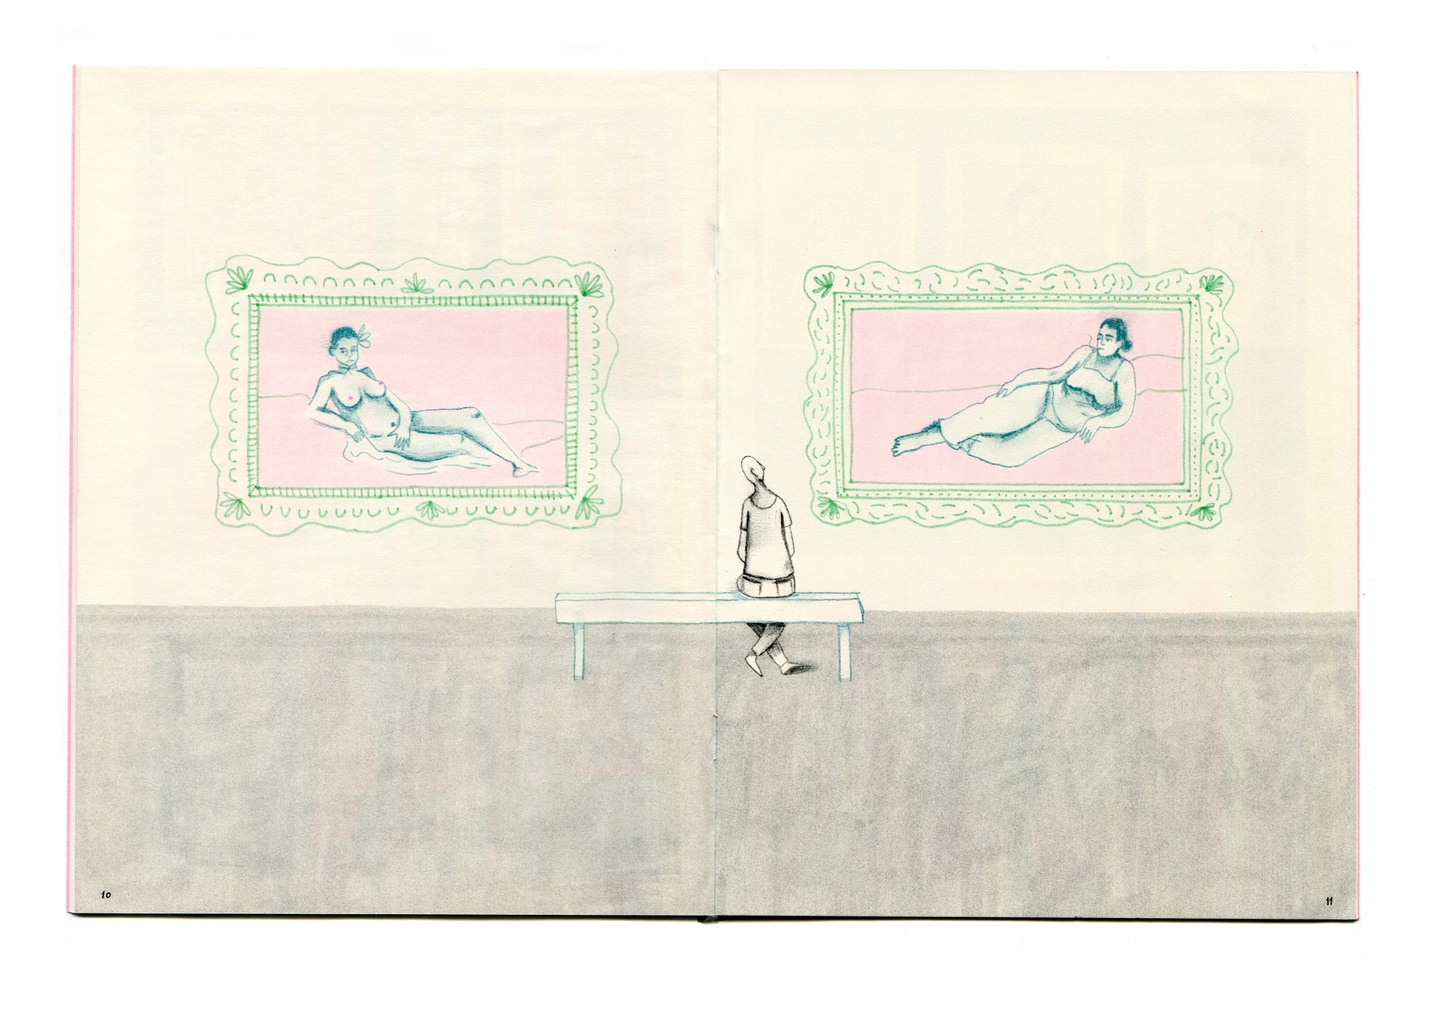 Open spread of book: a person sits on a bench between two large paintings/drawings of people (in landscape/horizontal orientation) on the wall; to the left, a person in nude, to the right, a clothed person. Both are lounging on beds/couches, set against a light pink background. The world outside these pictures is in grayscale.